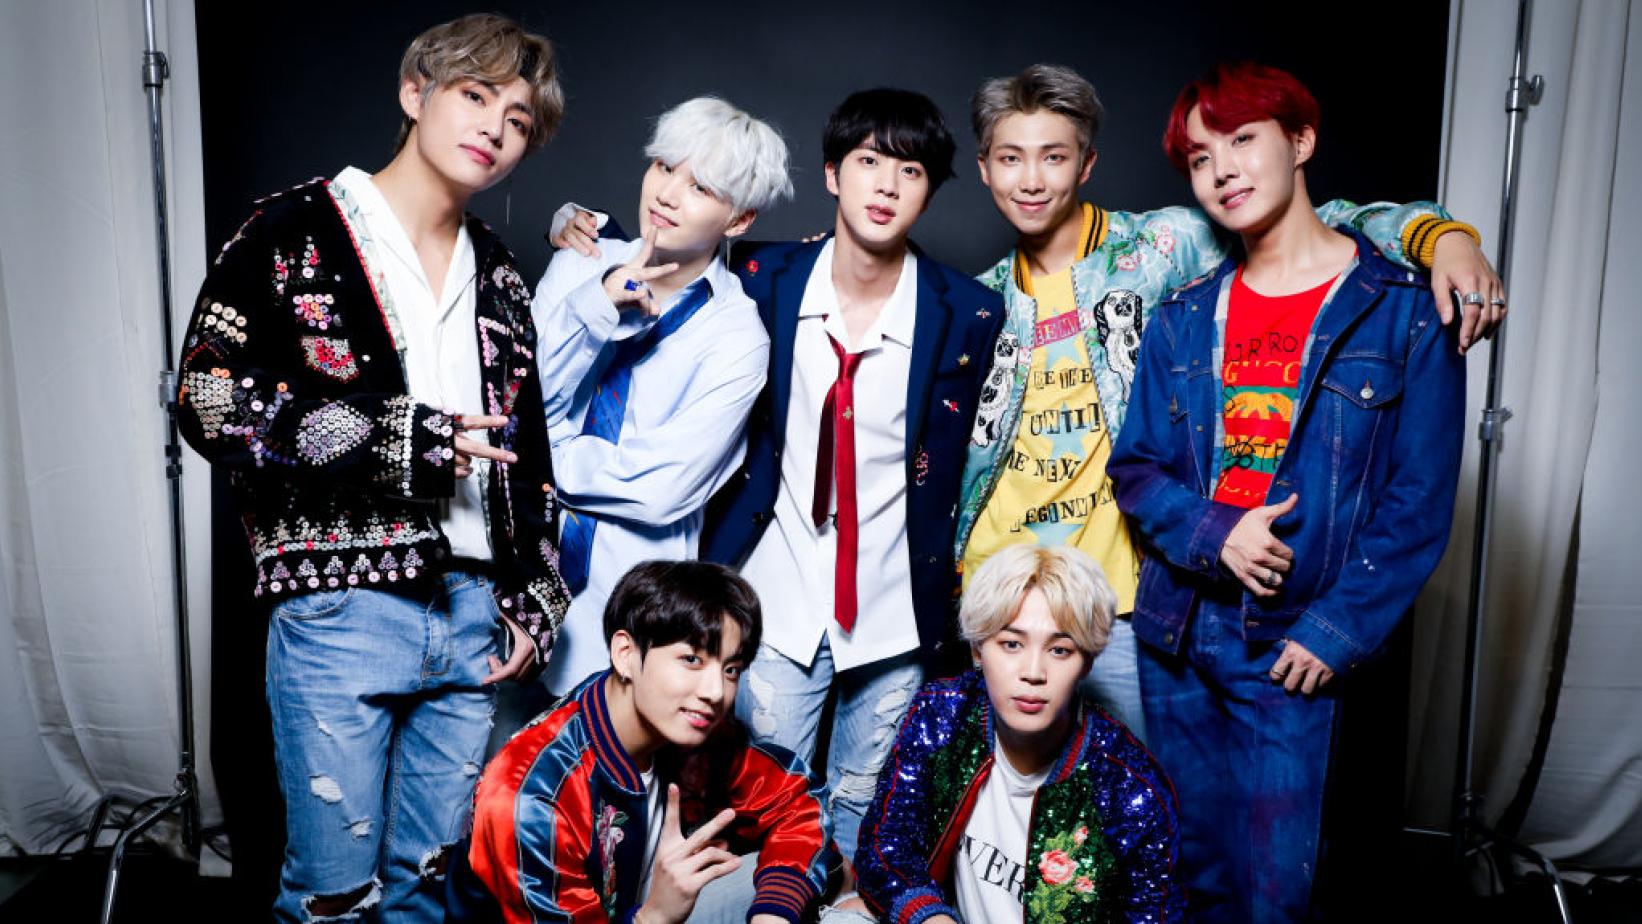 Bts Release Teaser For Their New Dvd Bts Memories Of 17 Music News Conversations About Her